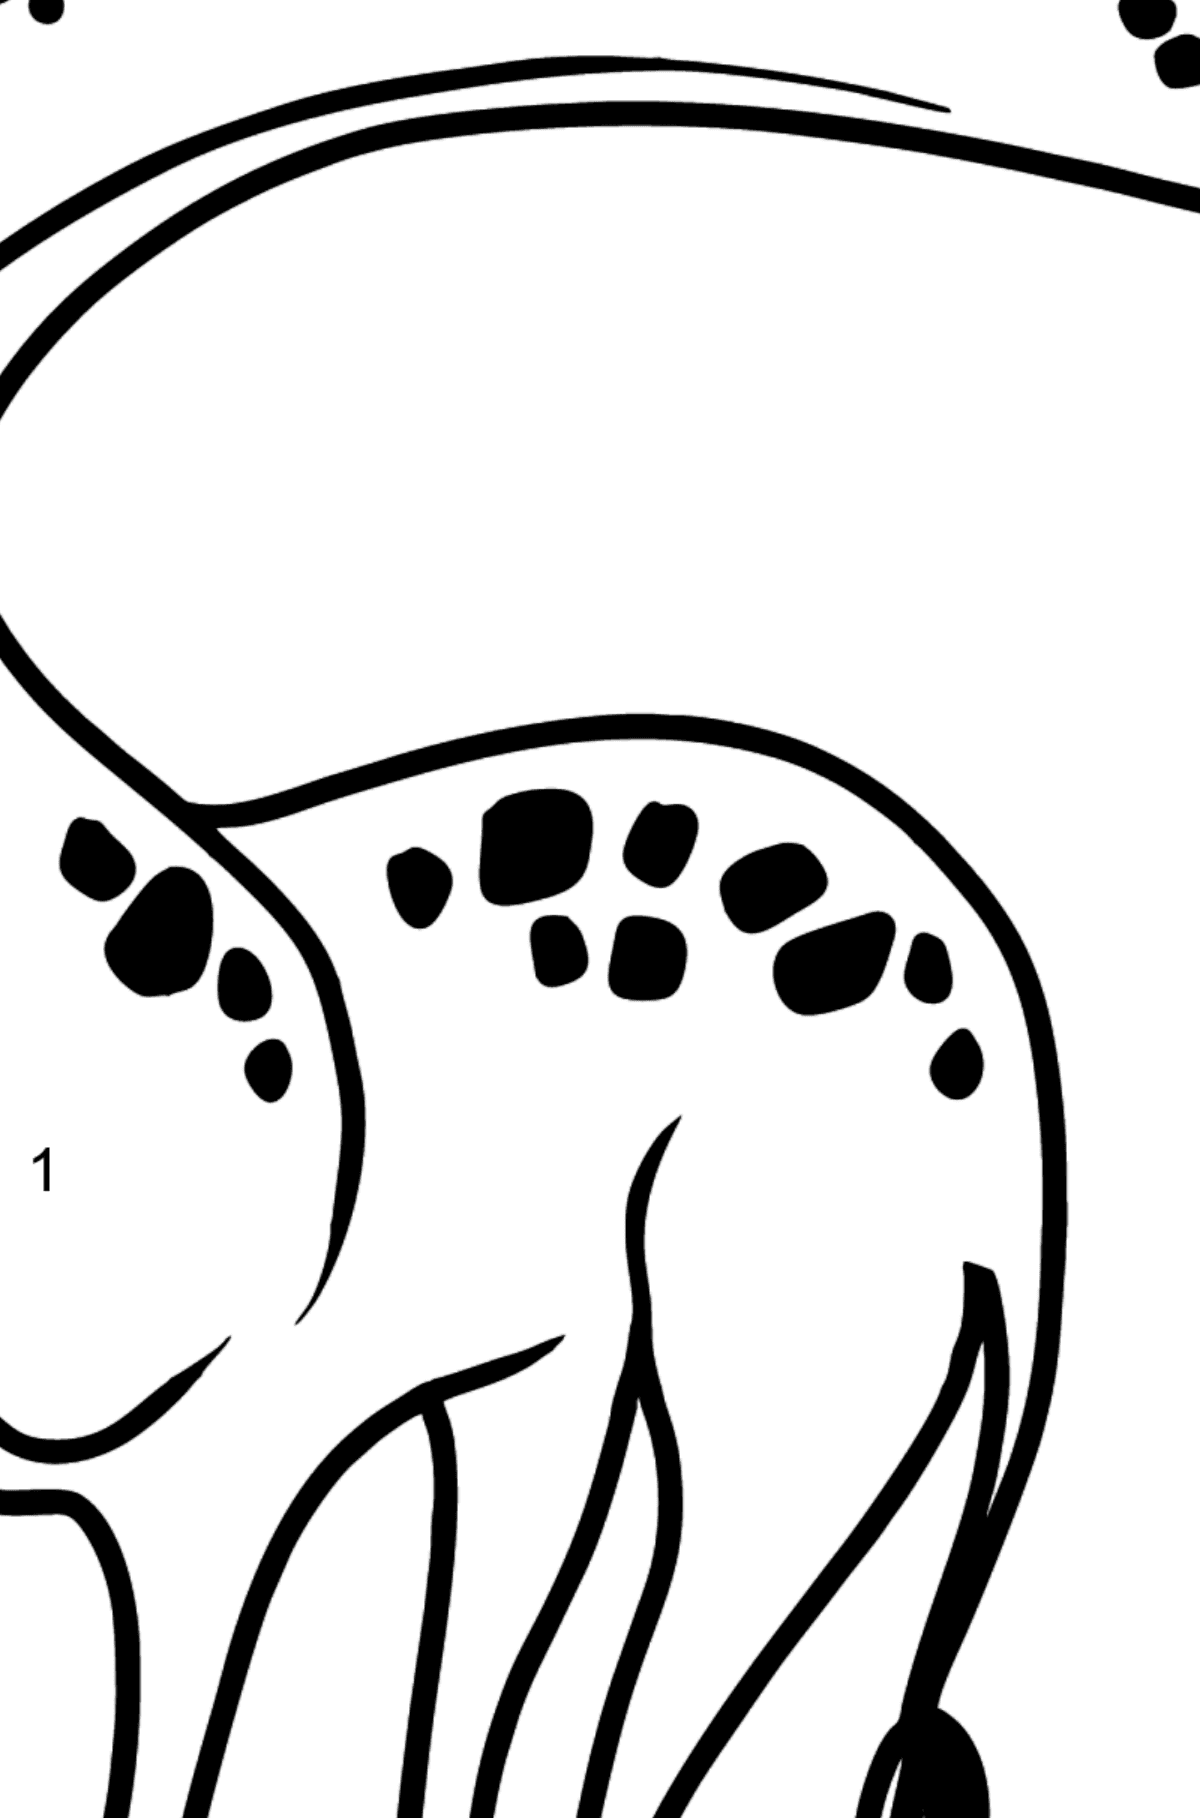 Giraffe coloring page - Coloring by Numbers for Kids